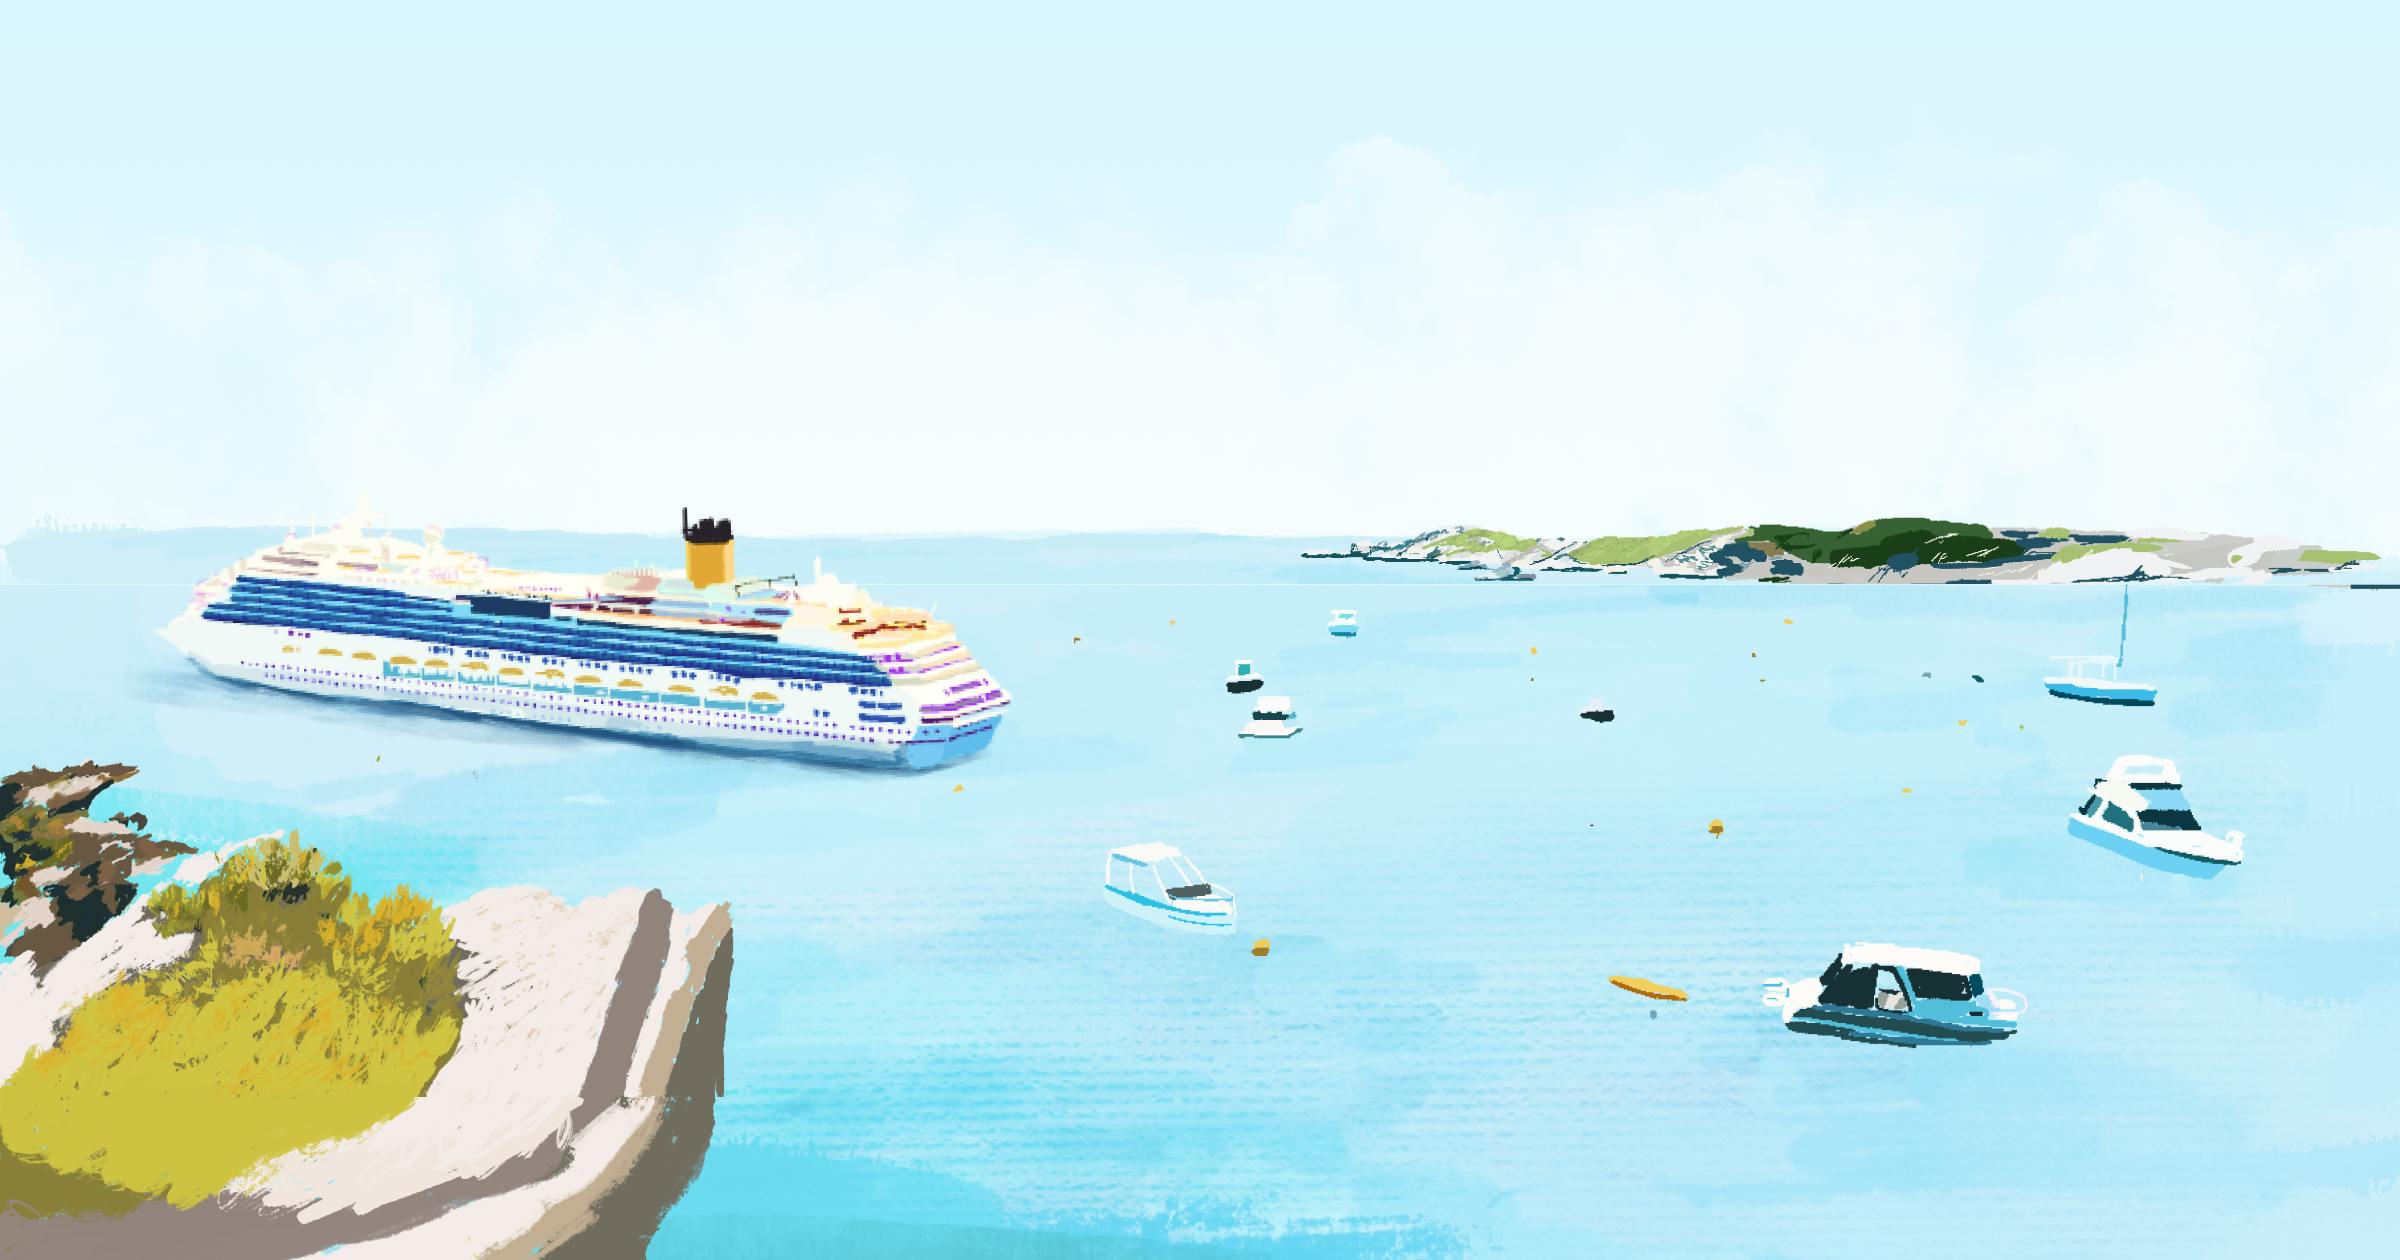 Illustration of a cruise ship leaving port with some small boats around it in the water